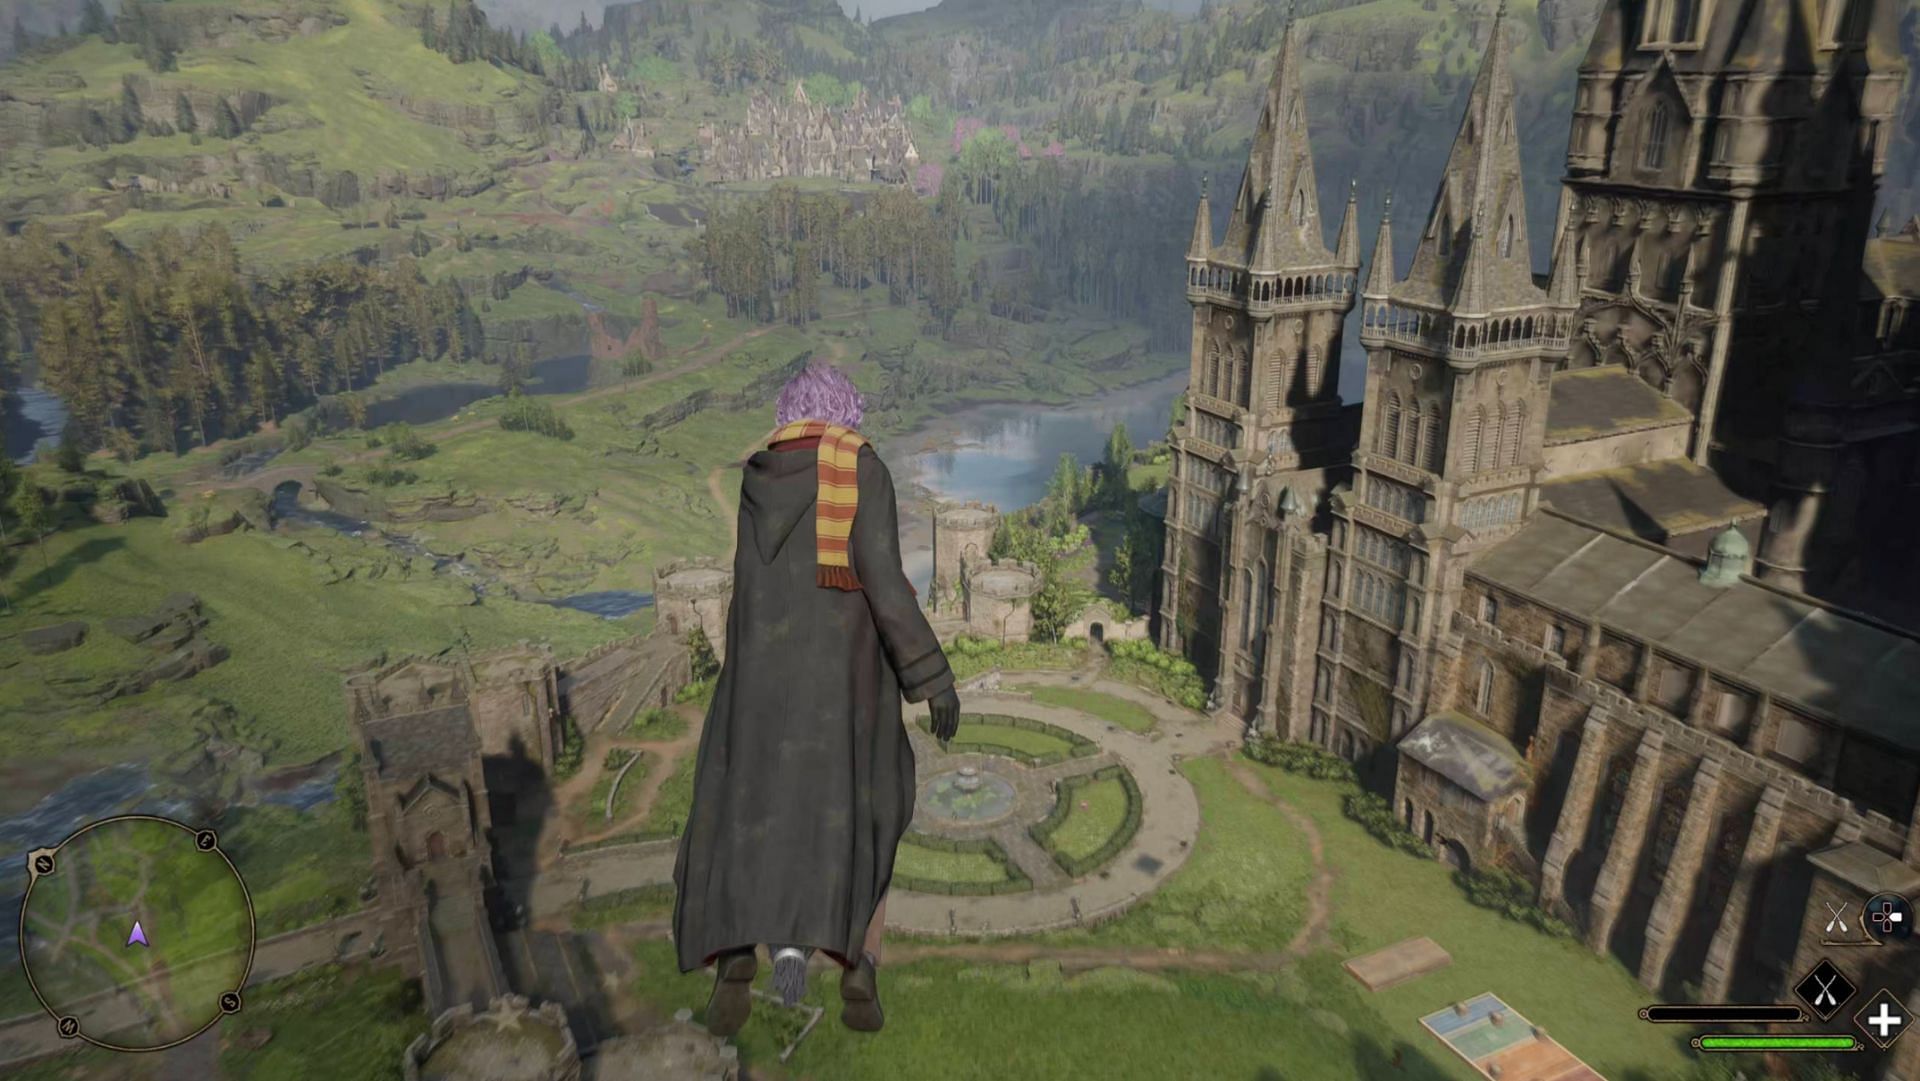 Using a keyboard and mouse has its own benefits in a game like Hogwarts Legacy (Image via Avalanche Software)